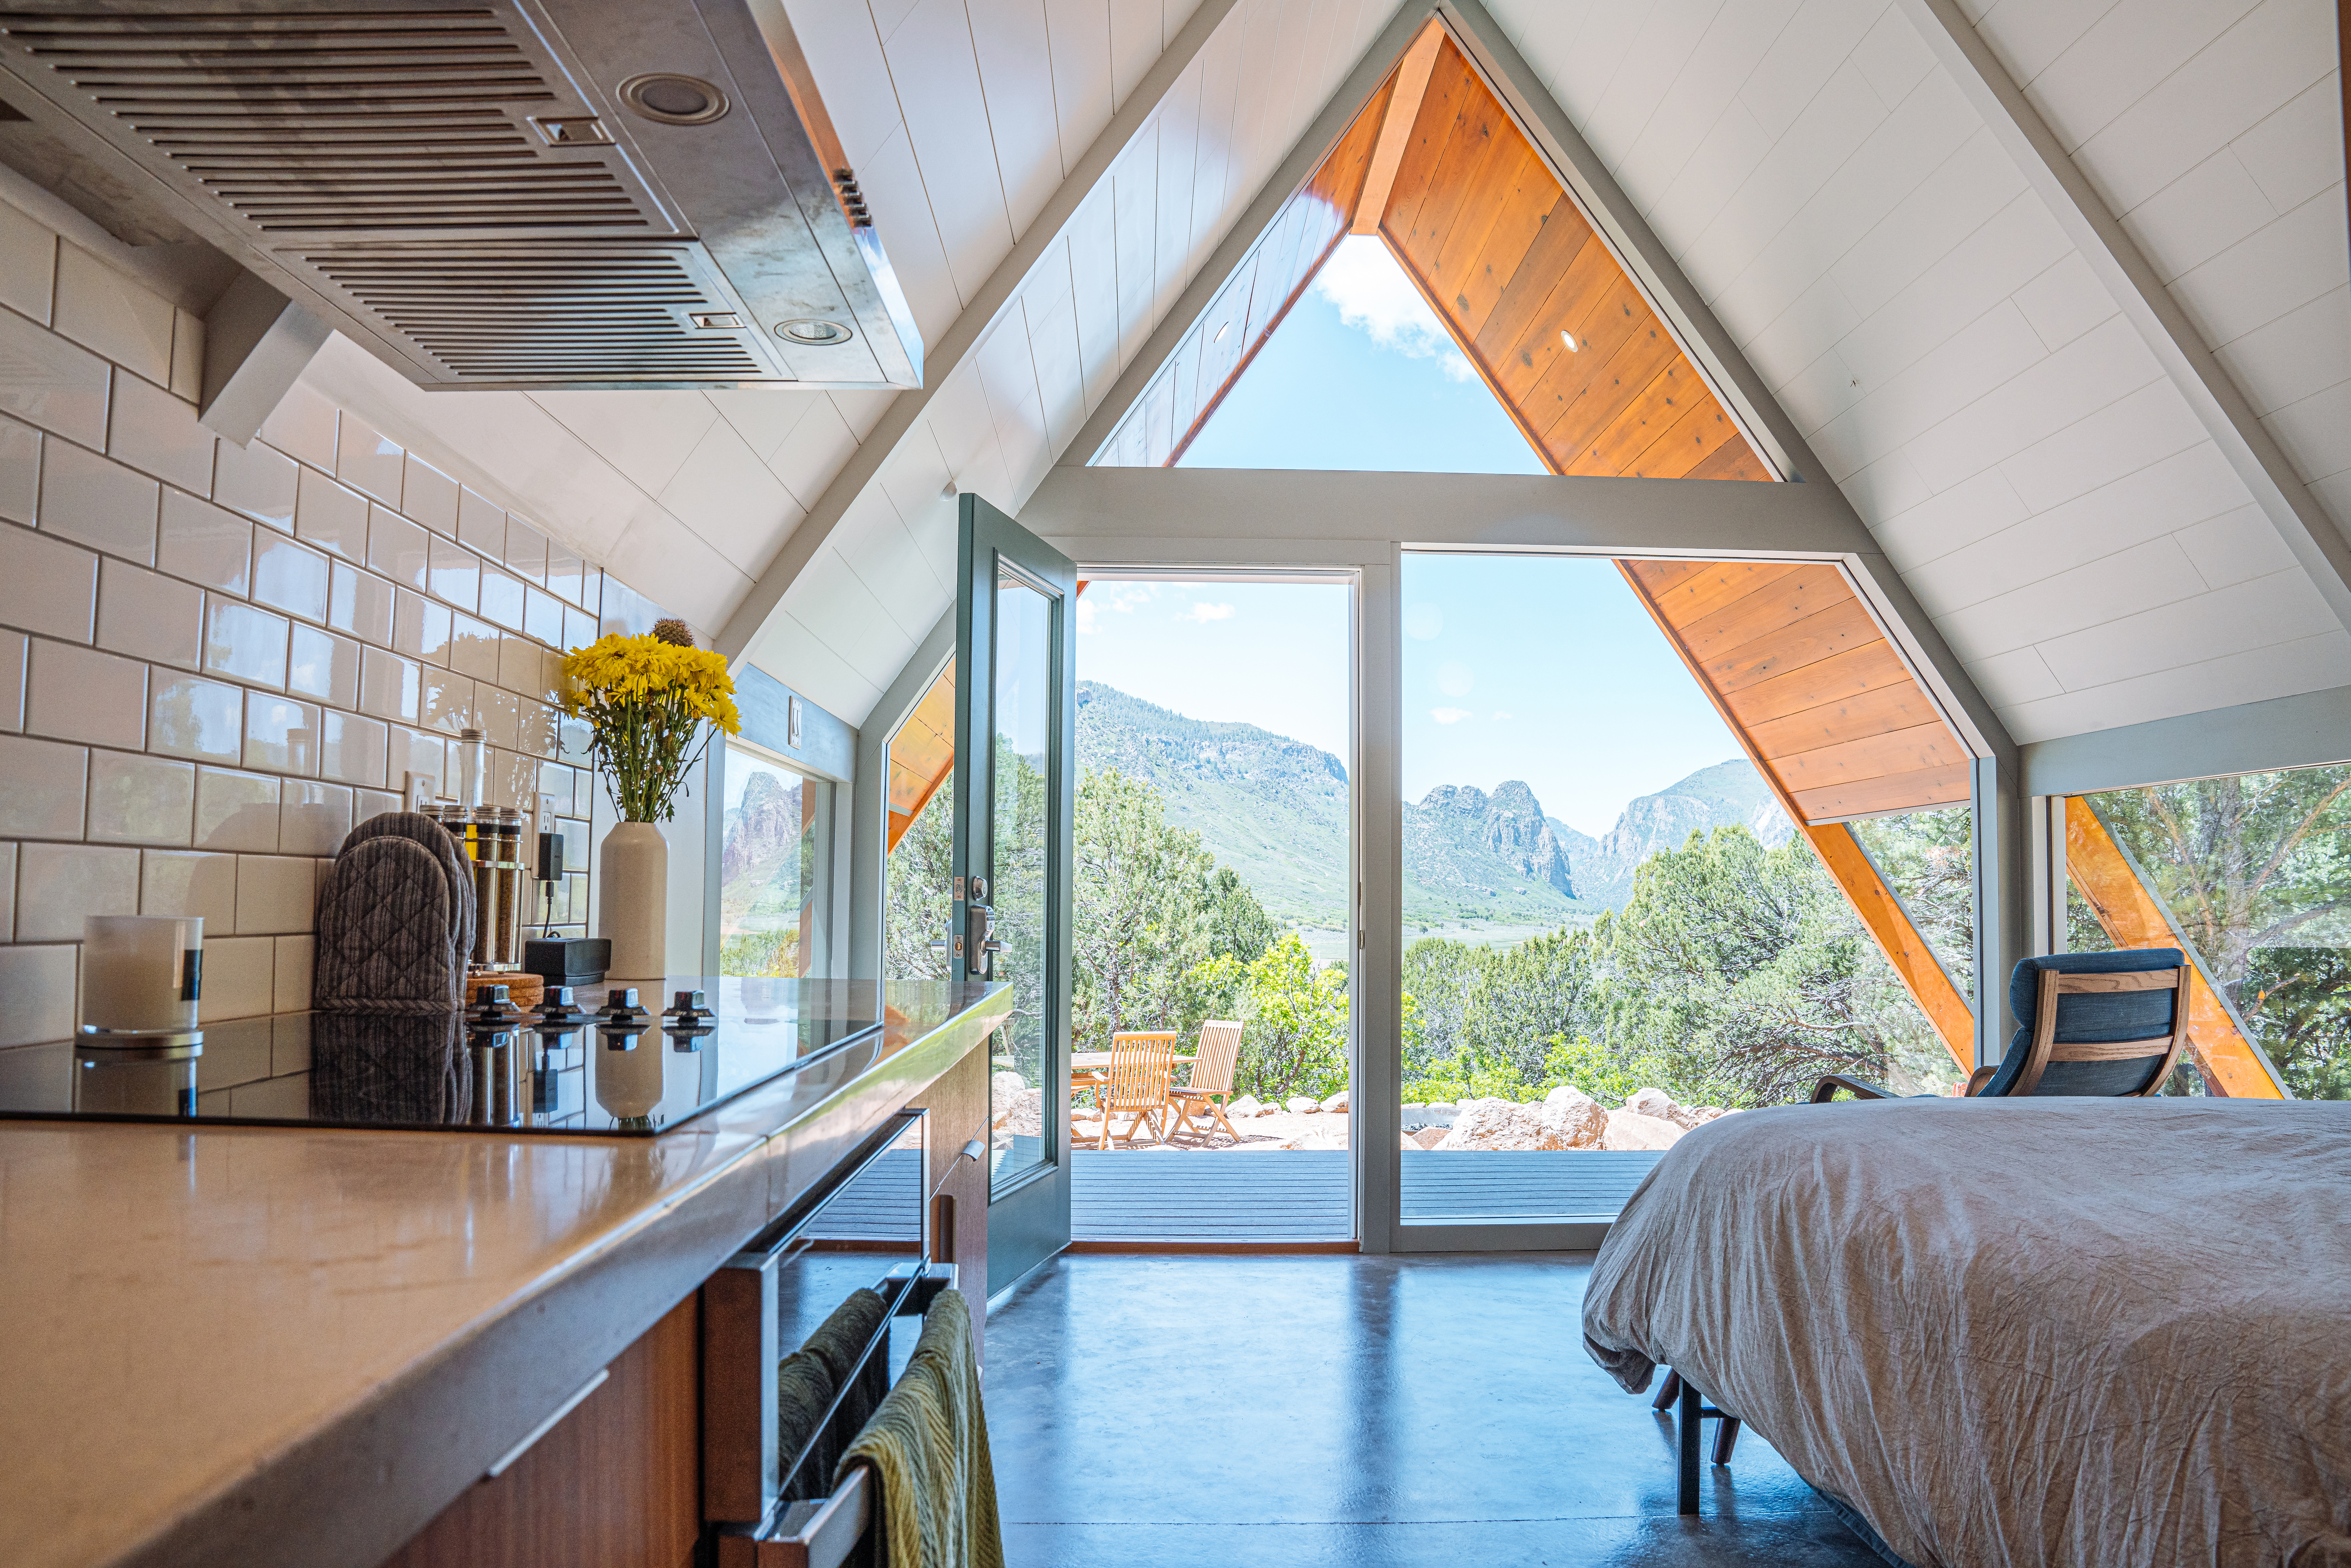 Colorado A-Frame rental property overlooking the mountains